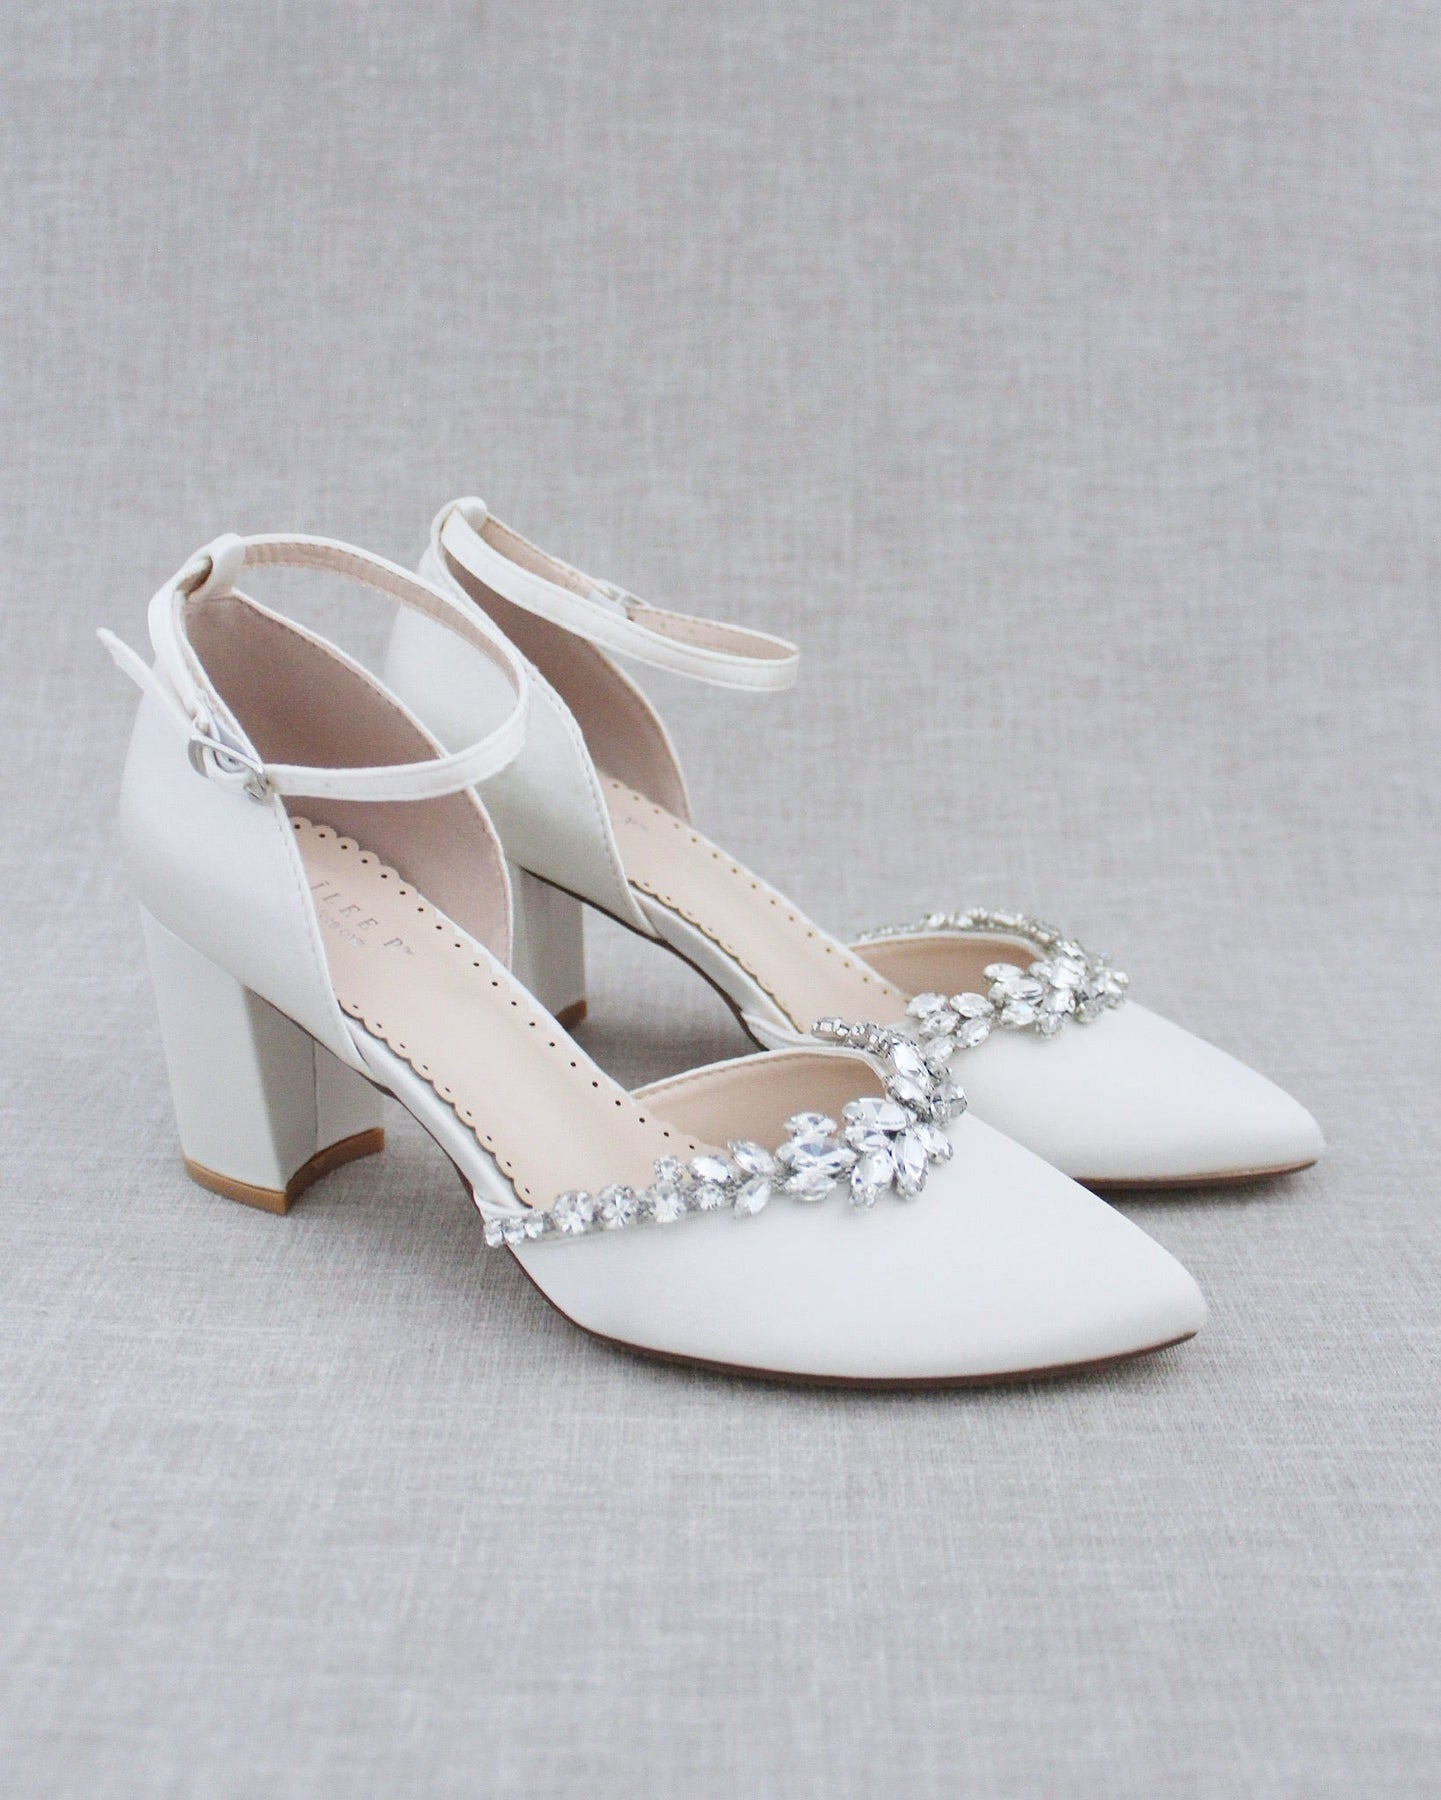 Ivory Wedding Shoes With Pearls, Block Heel Slingback - Etsy